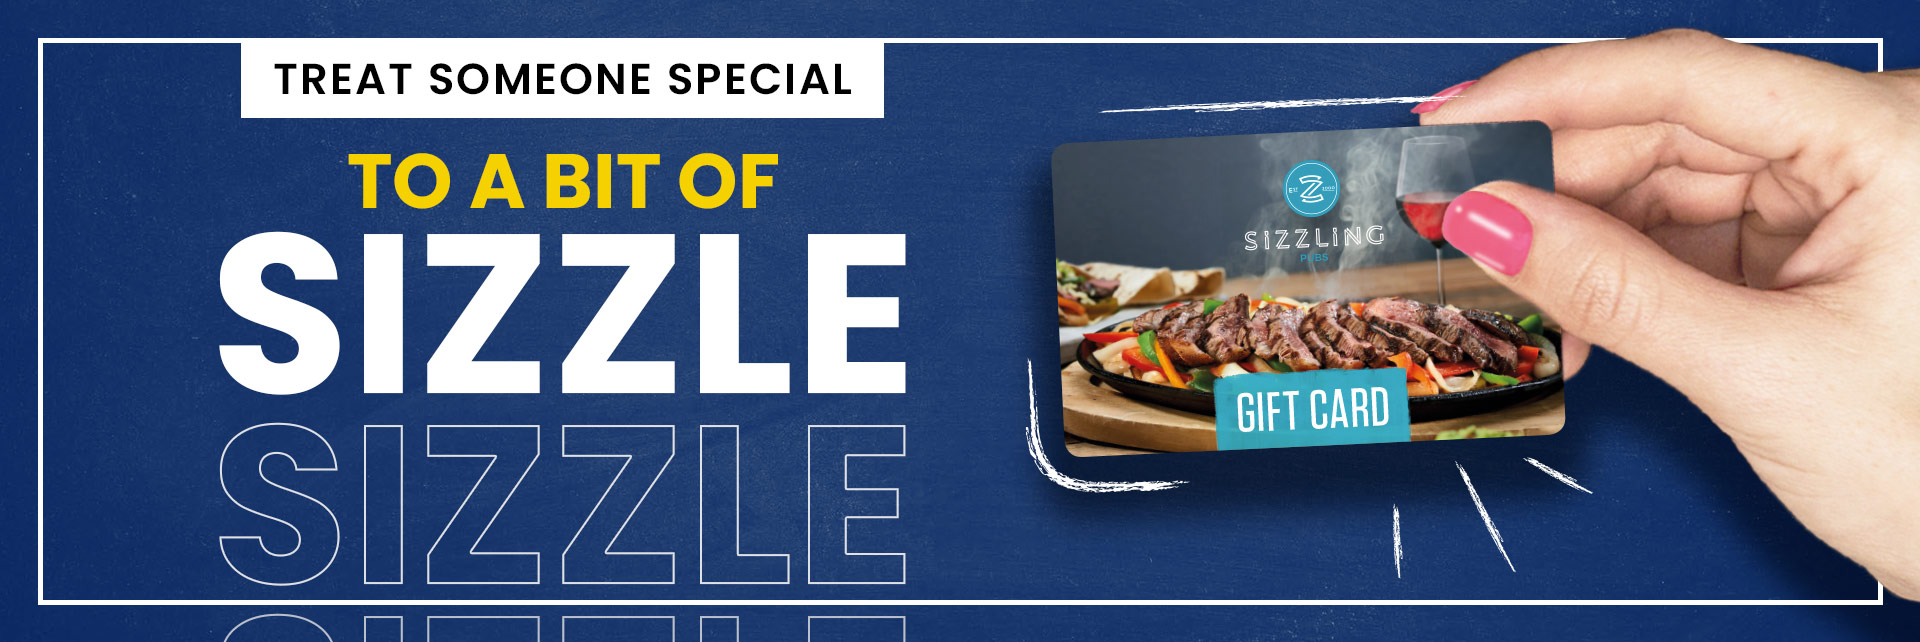 Sizzling Pubs Gift Card at Red Lion, Shrewsbury in Shrewsbury